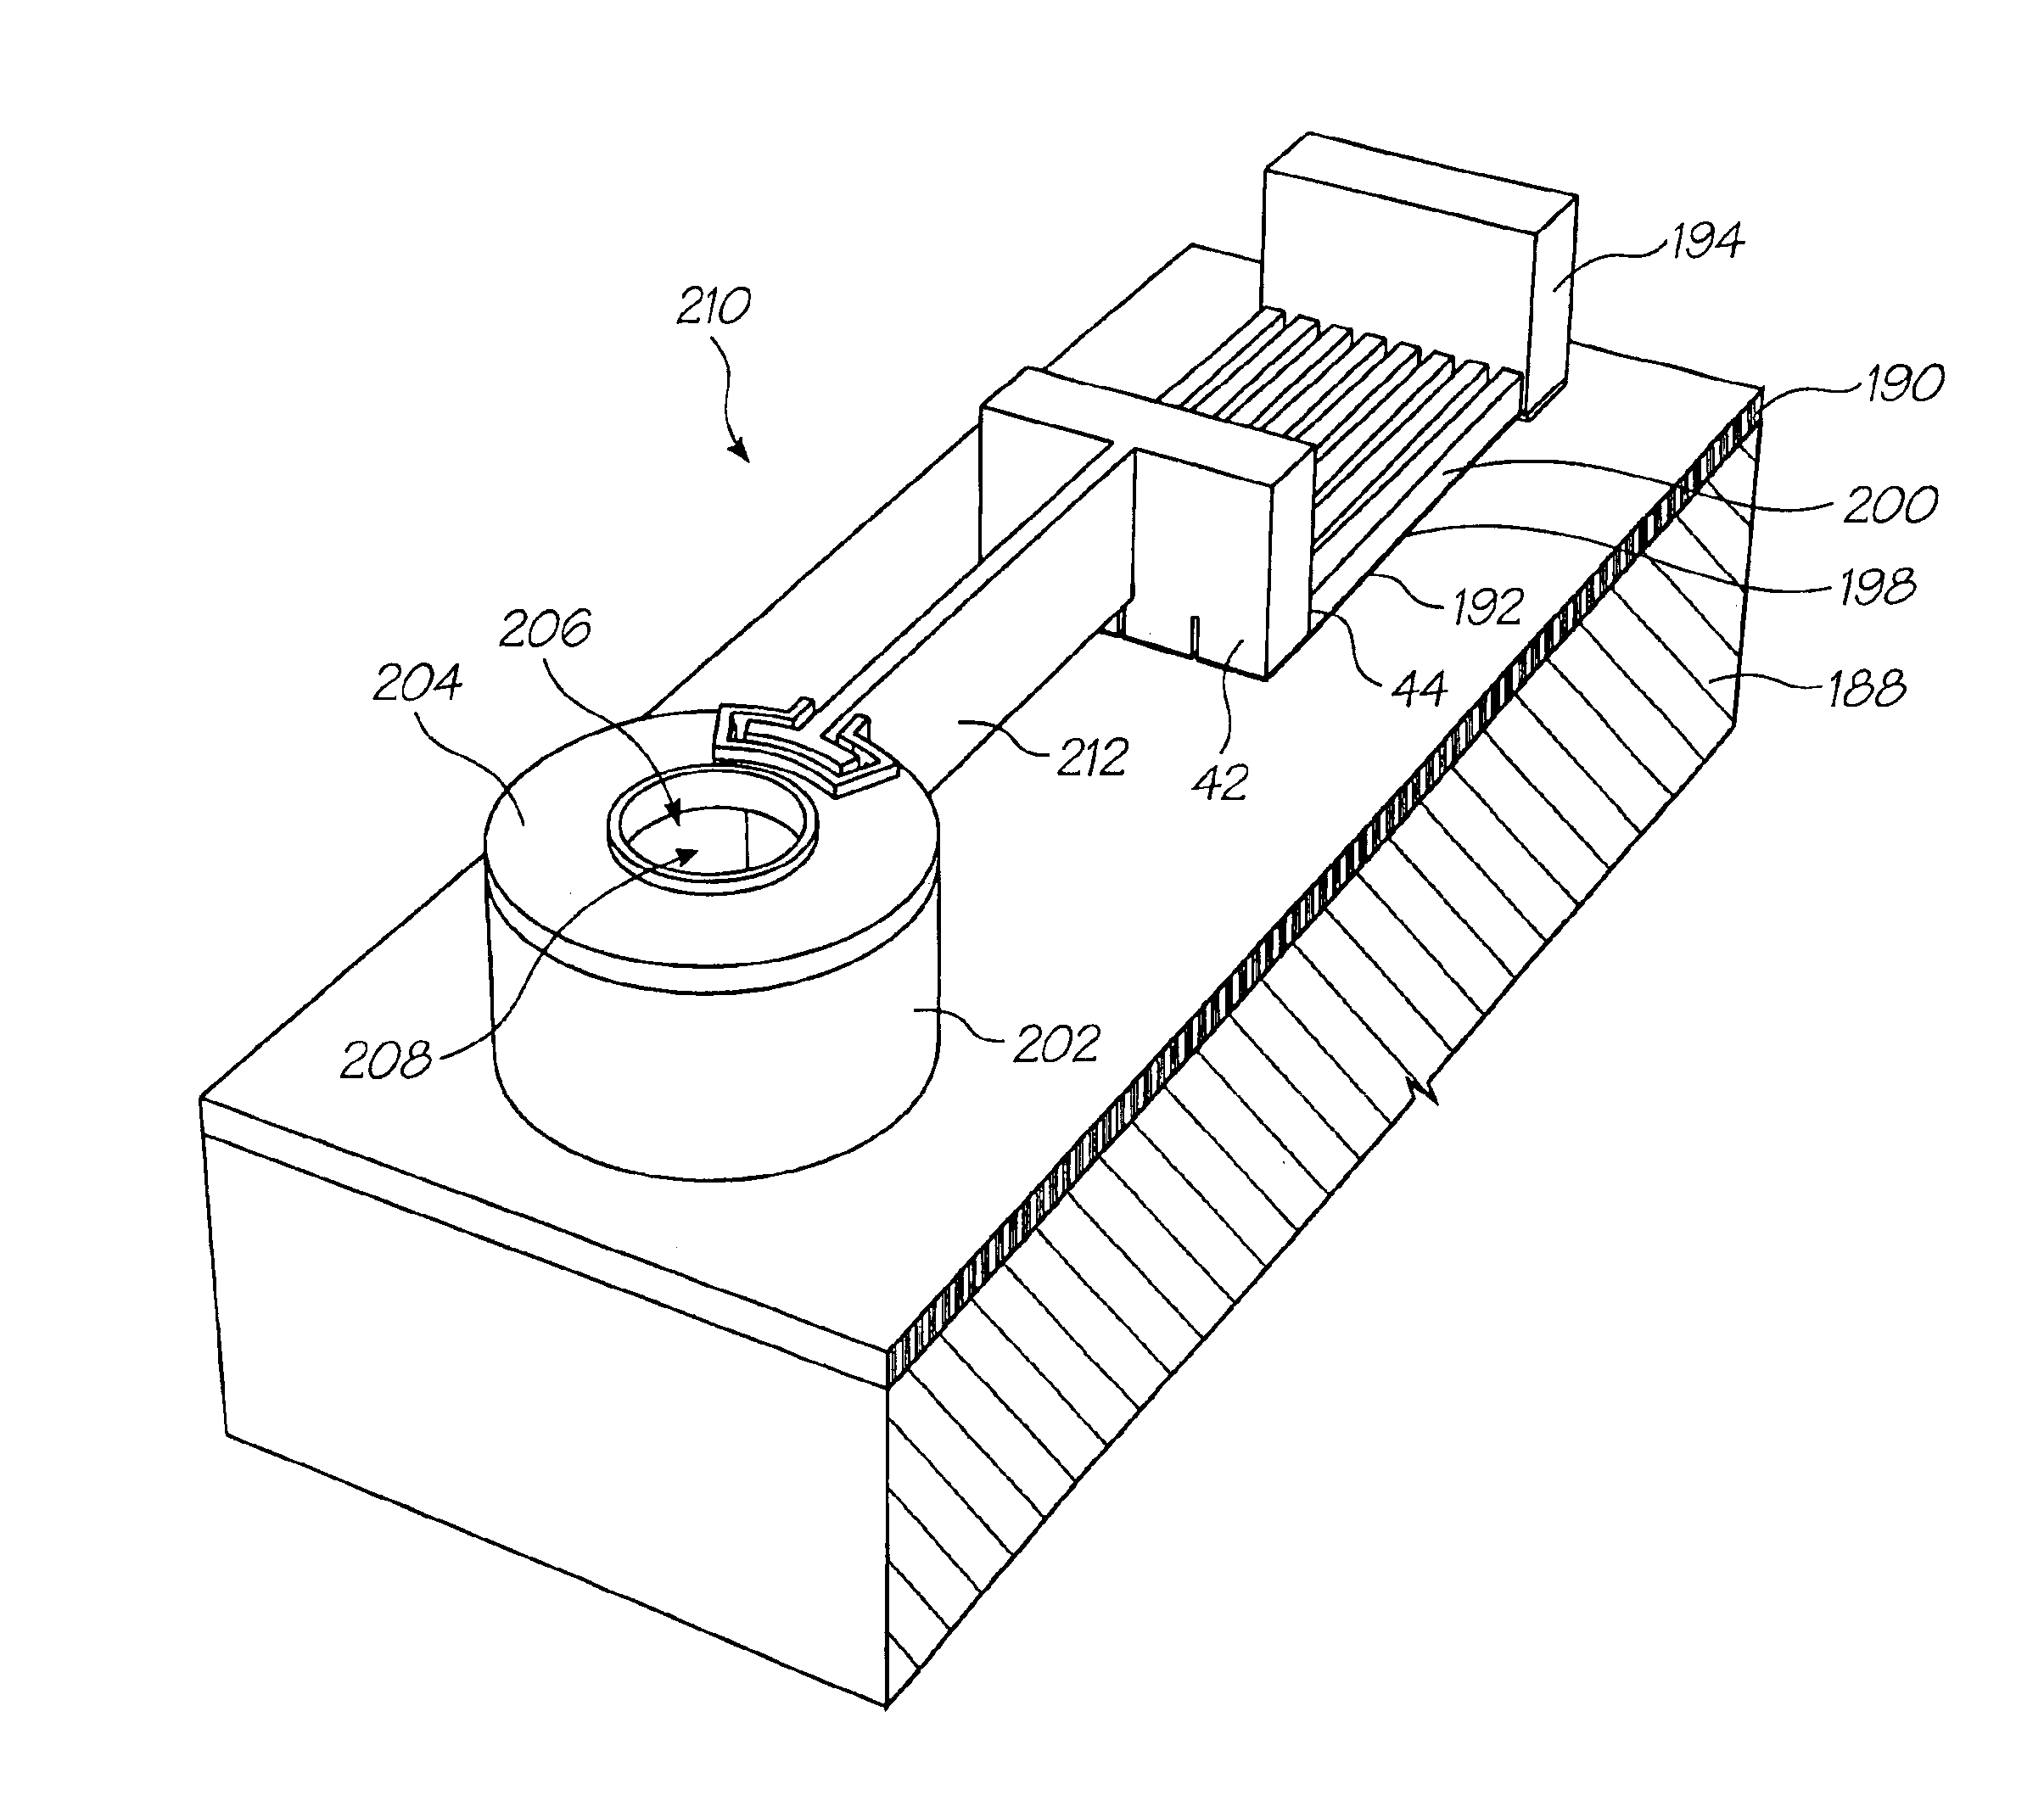 Printing mechanism for a wide format pagewidth inkjet printer